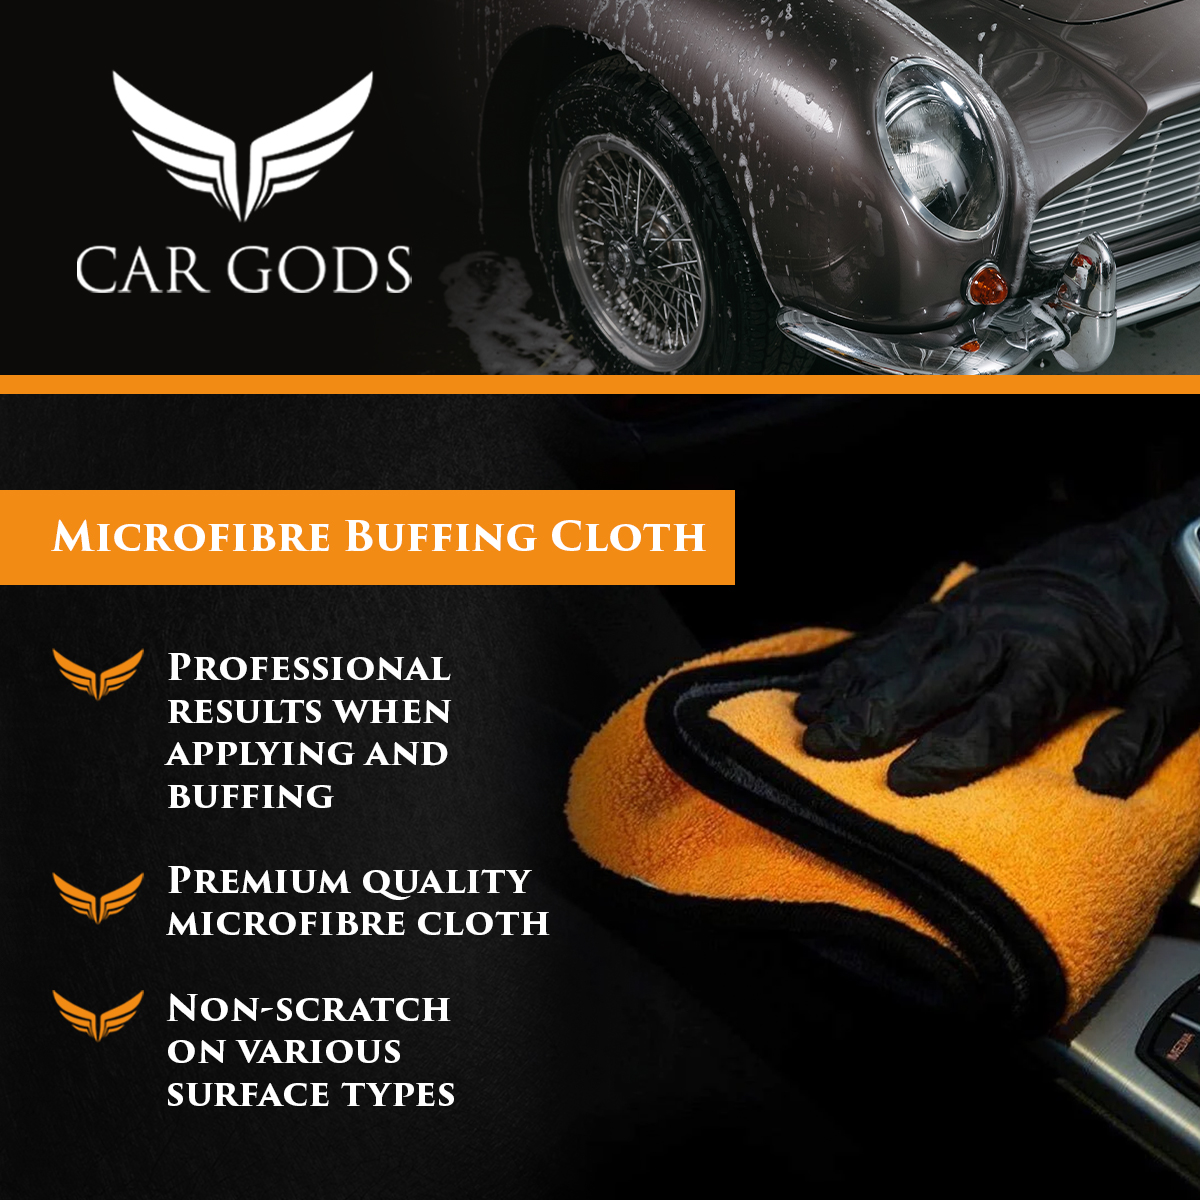 Car Gods Microfibre Buffing Cloth. A non-scratch premium quality microfibre cloth suitable for use on interior and exterior surfaces allowing you to achieve professional results when applying and buffing your favourite Car Gods products.